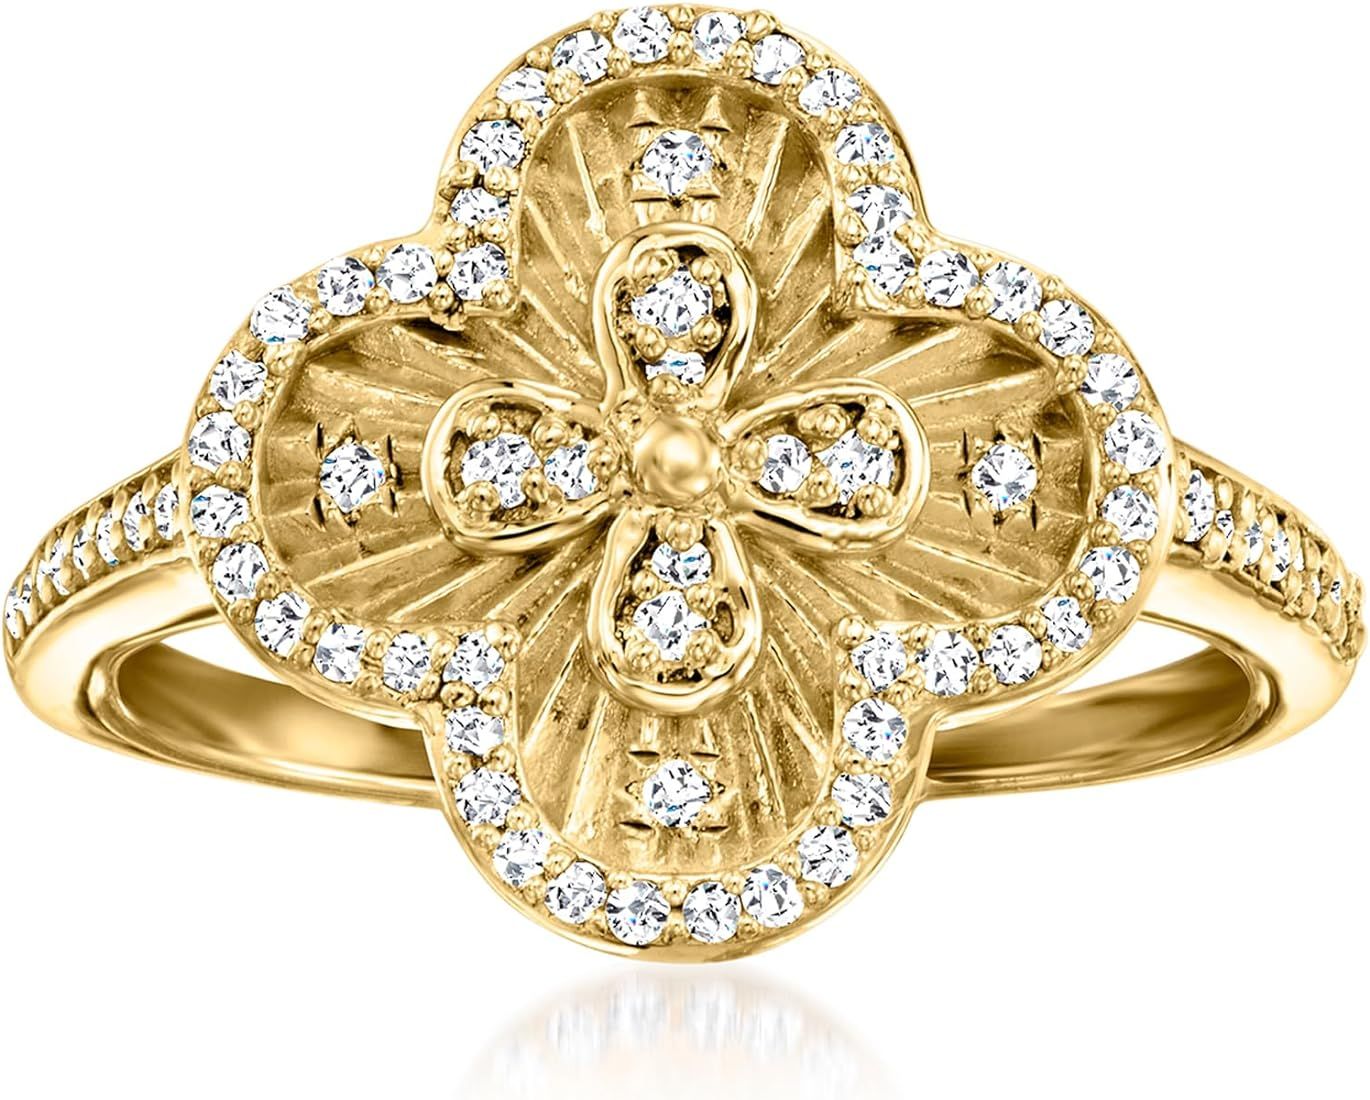 Ross-Simons 0.33 ct. t.w. Diamond Clover Ring in 18kt Gold Over Sterling | Amazon (US)